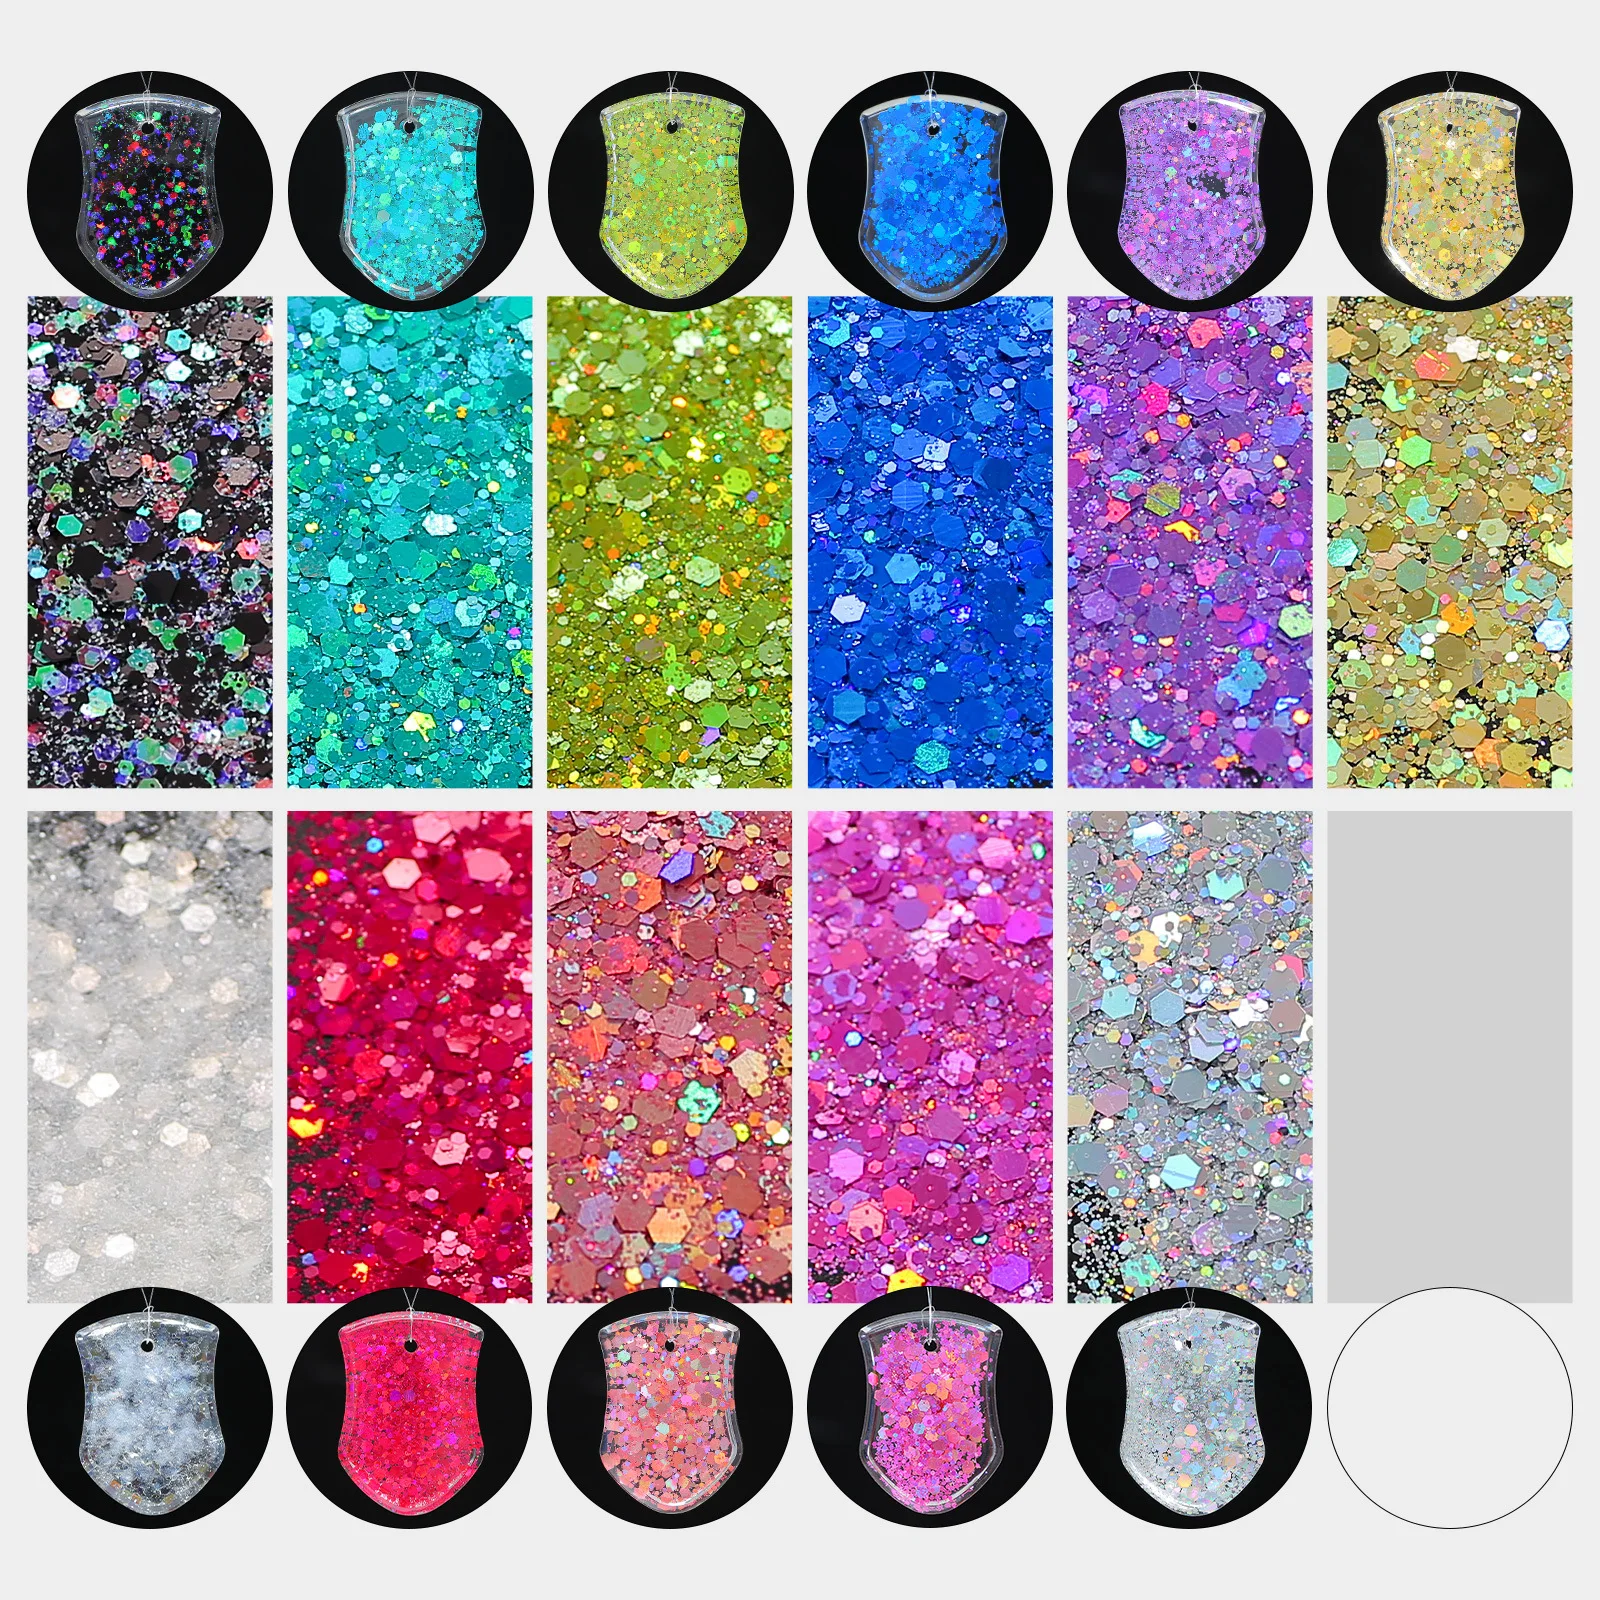 

3D Mermaid Sequins Nail Glitter Flakes Mixed Mirror Hexagon Spangles Slices Paillette Nail Art Silicone Mold Filler Decoration